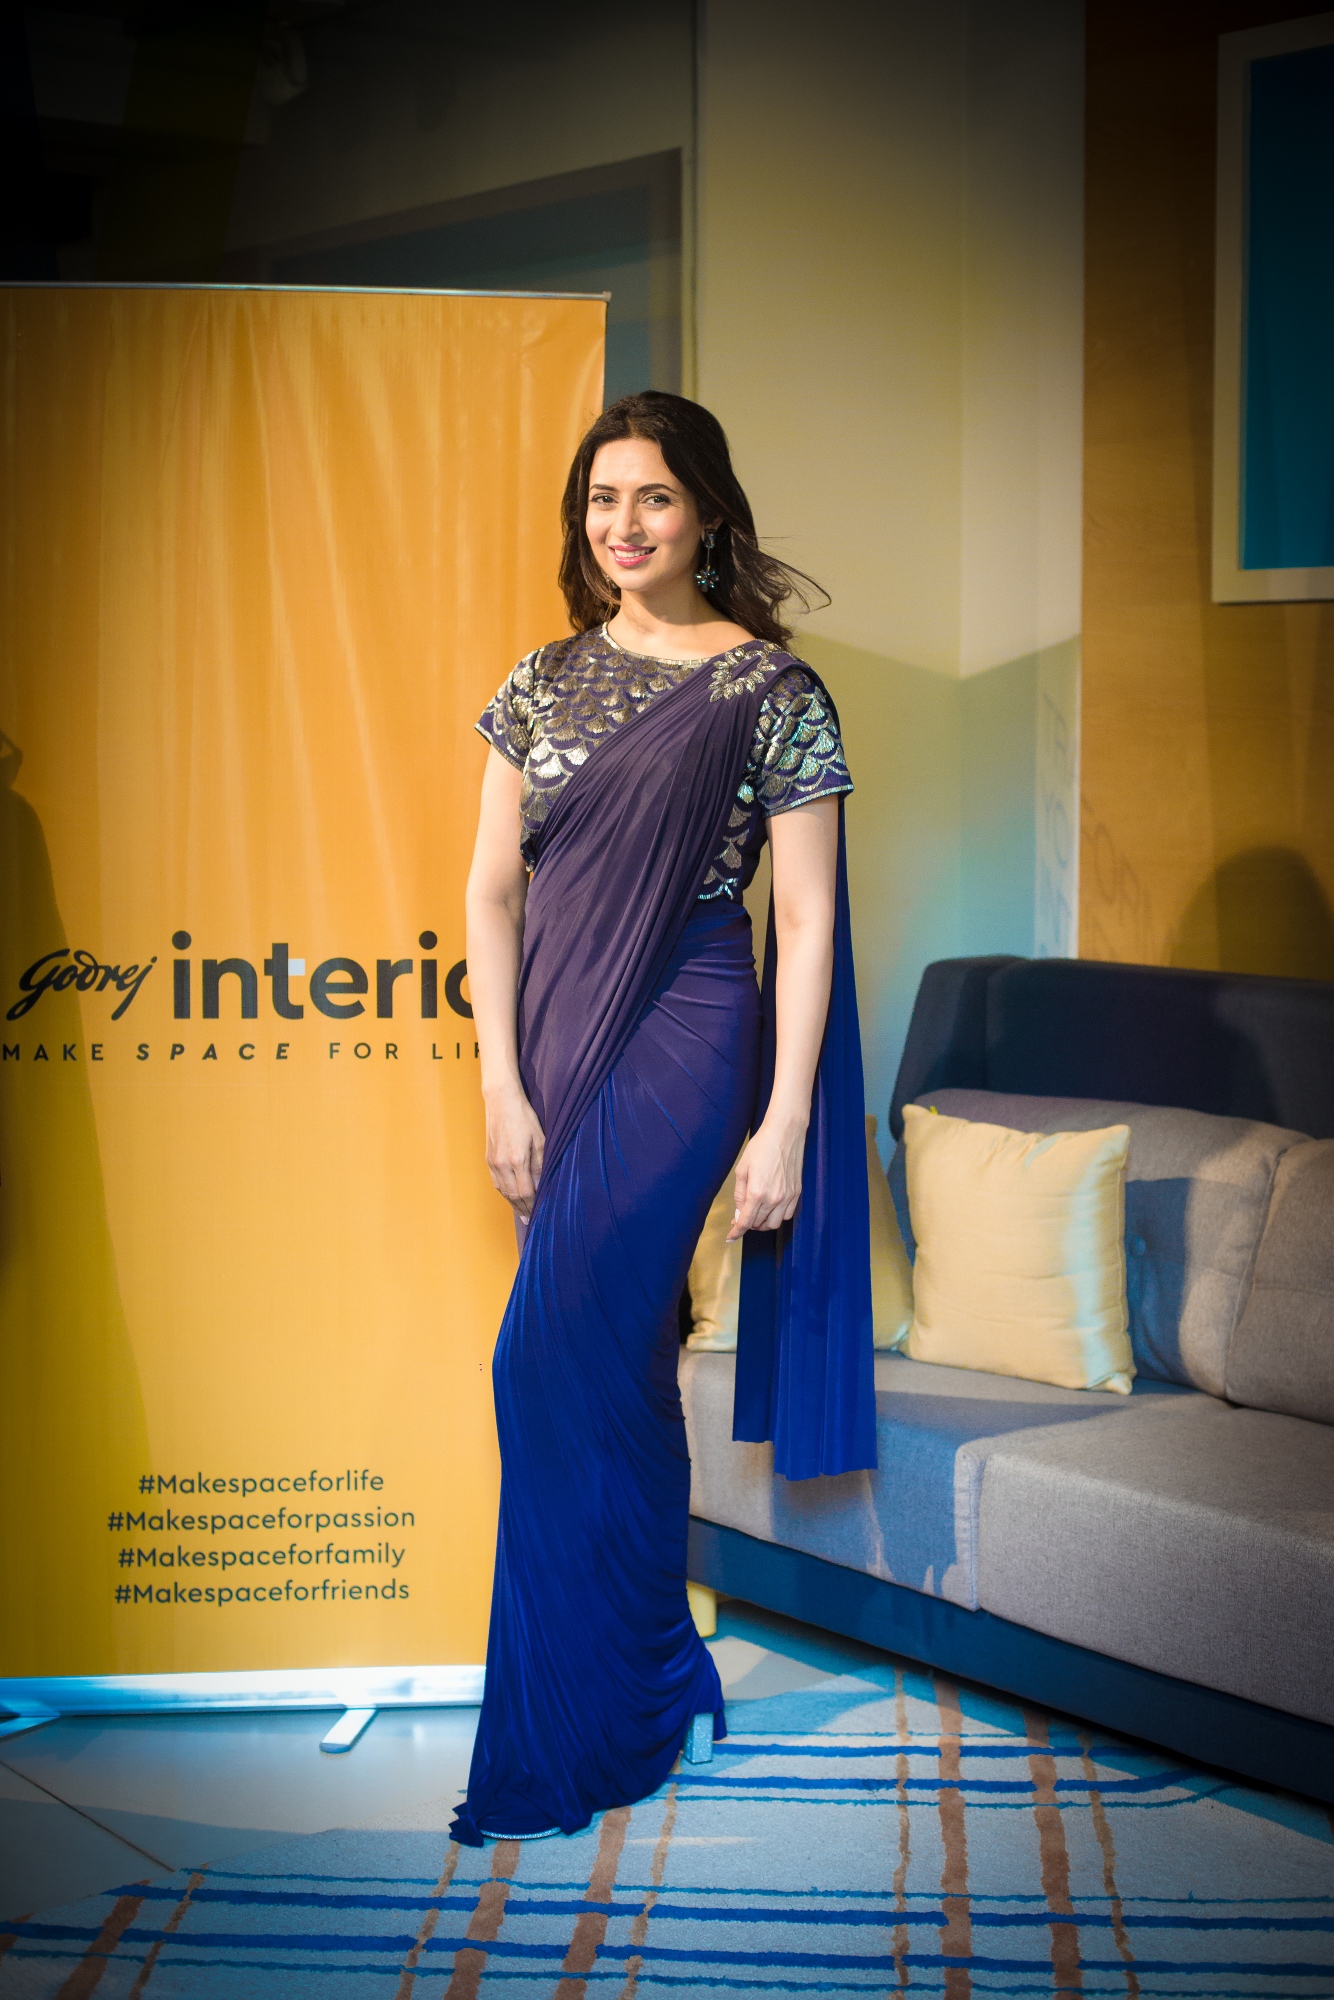 Television actress Divyanka Tripathi at the launch Godrej Interio's new campaign – "Make Space For Life".-Photo By Sachin Murdeshwar / GPN